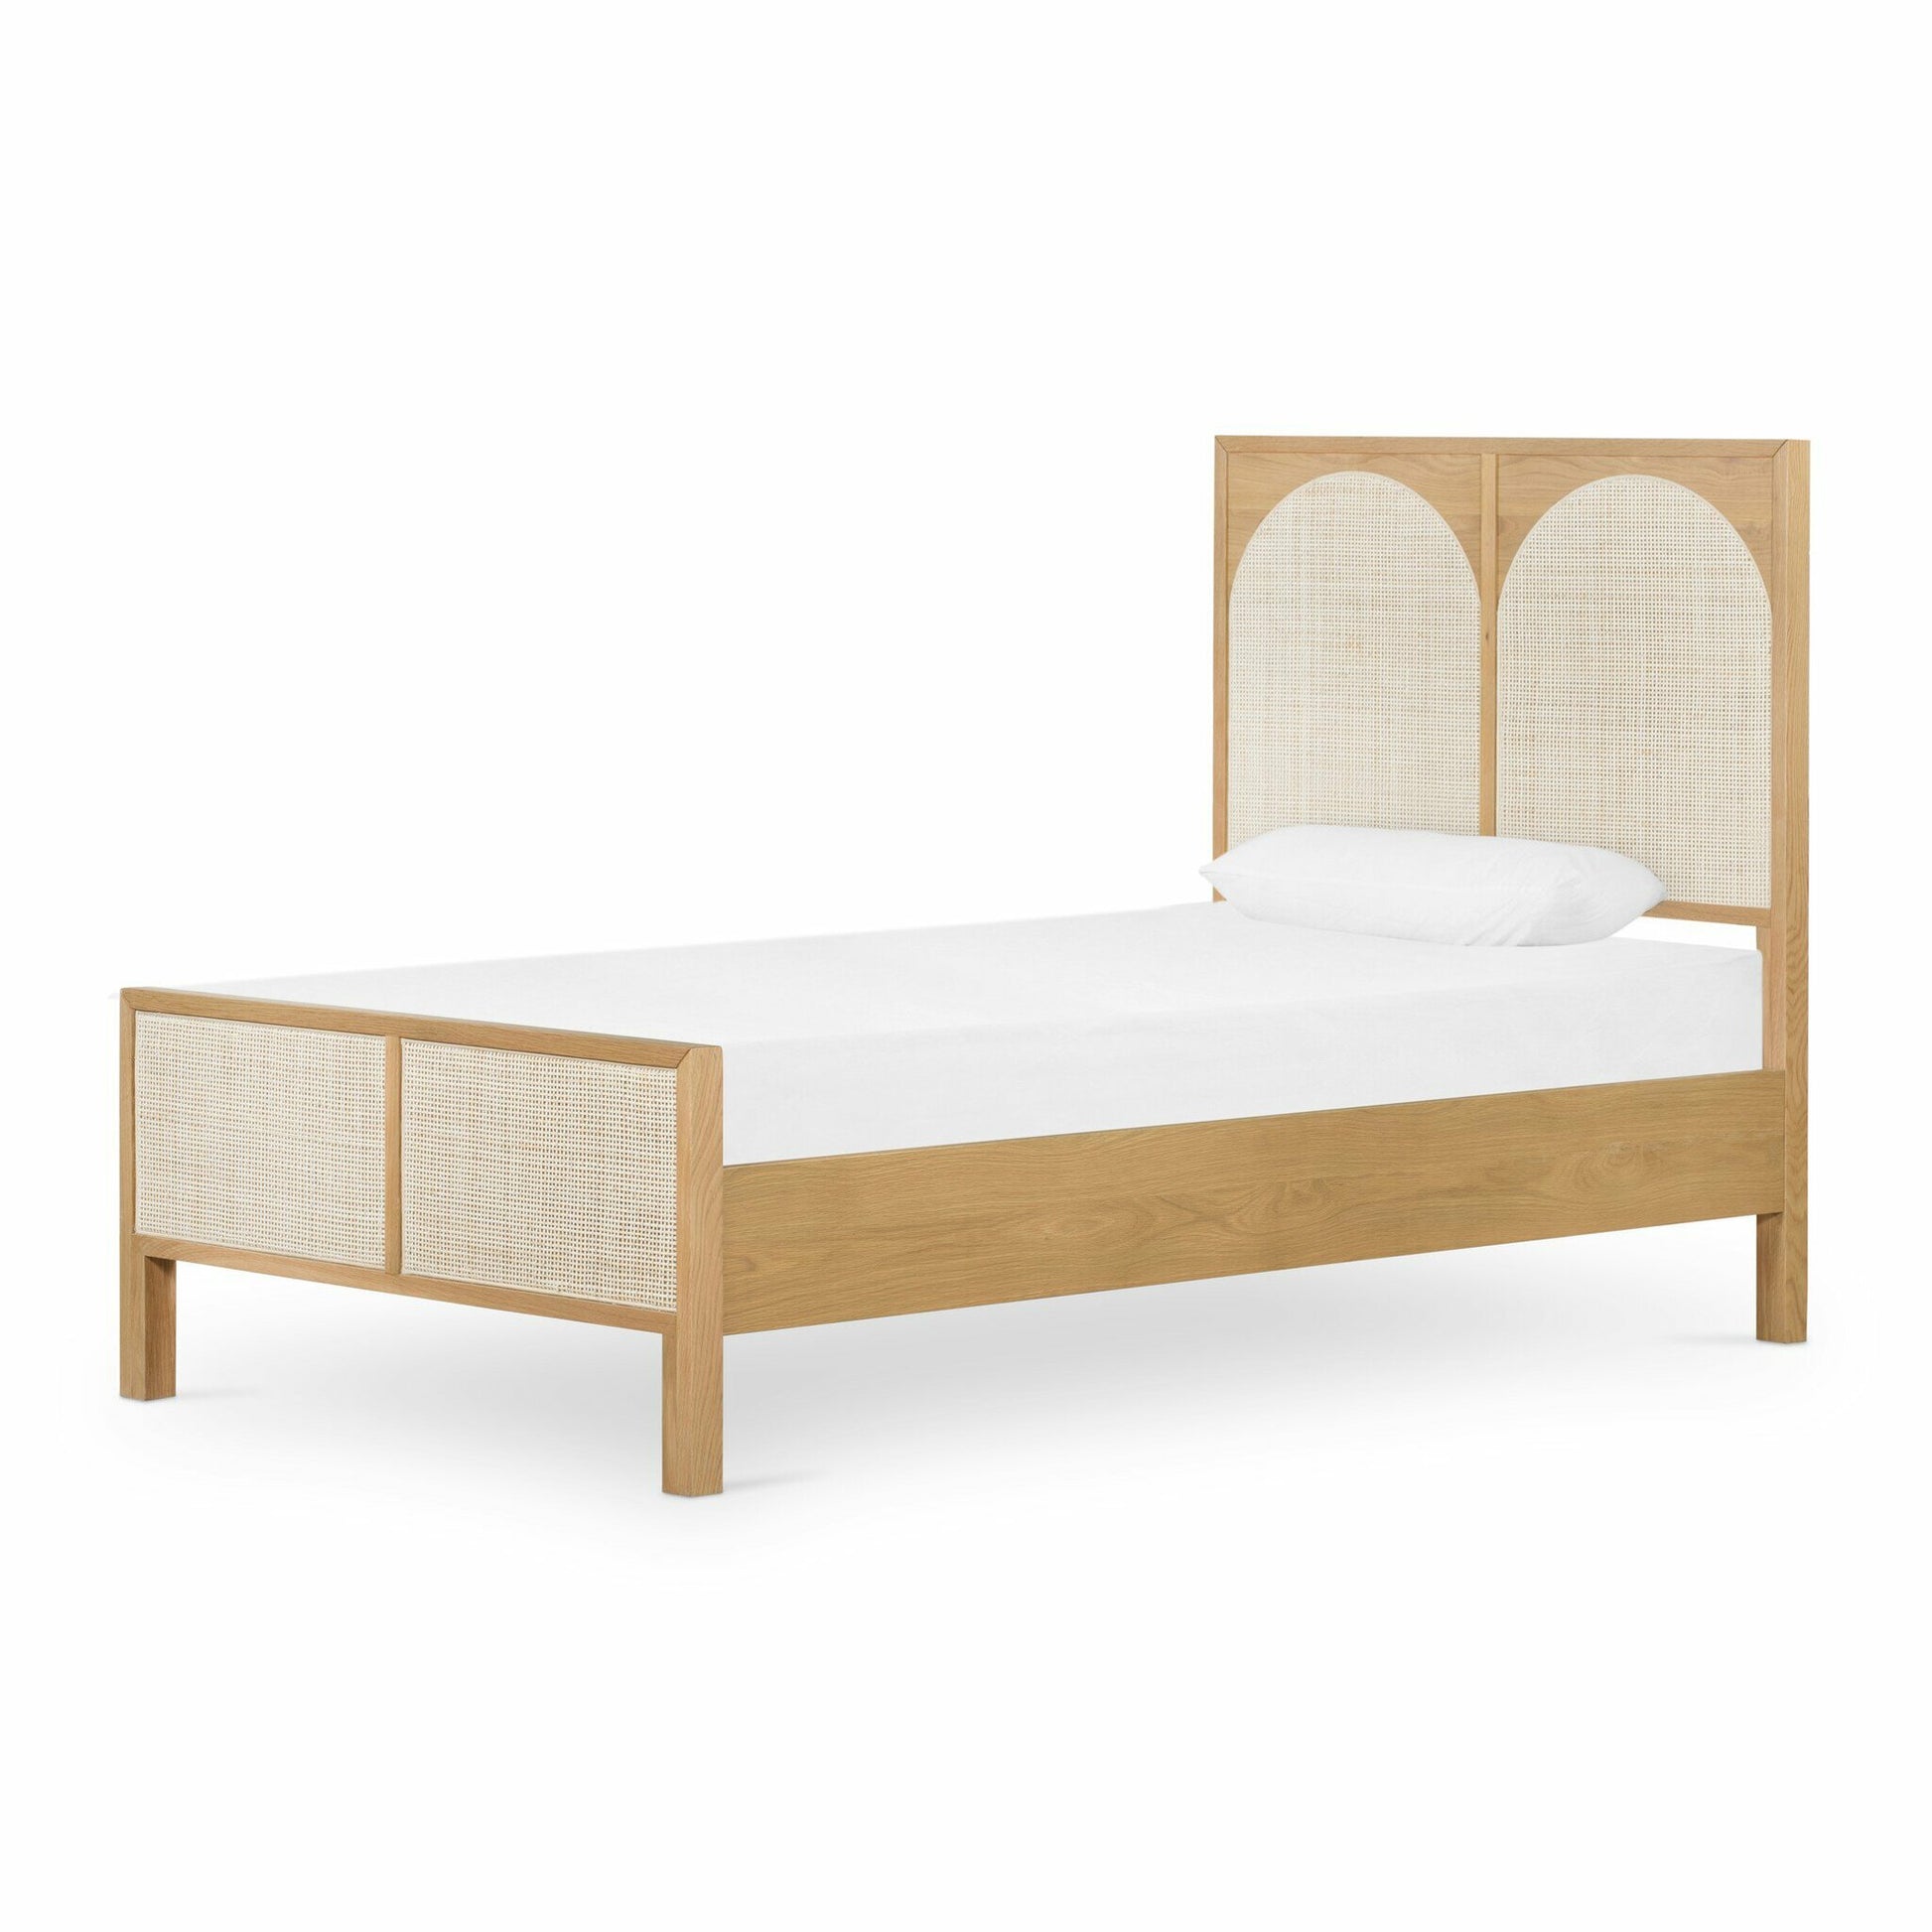 Zaltana Twin Bed Angle View woven arches